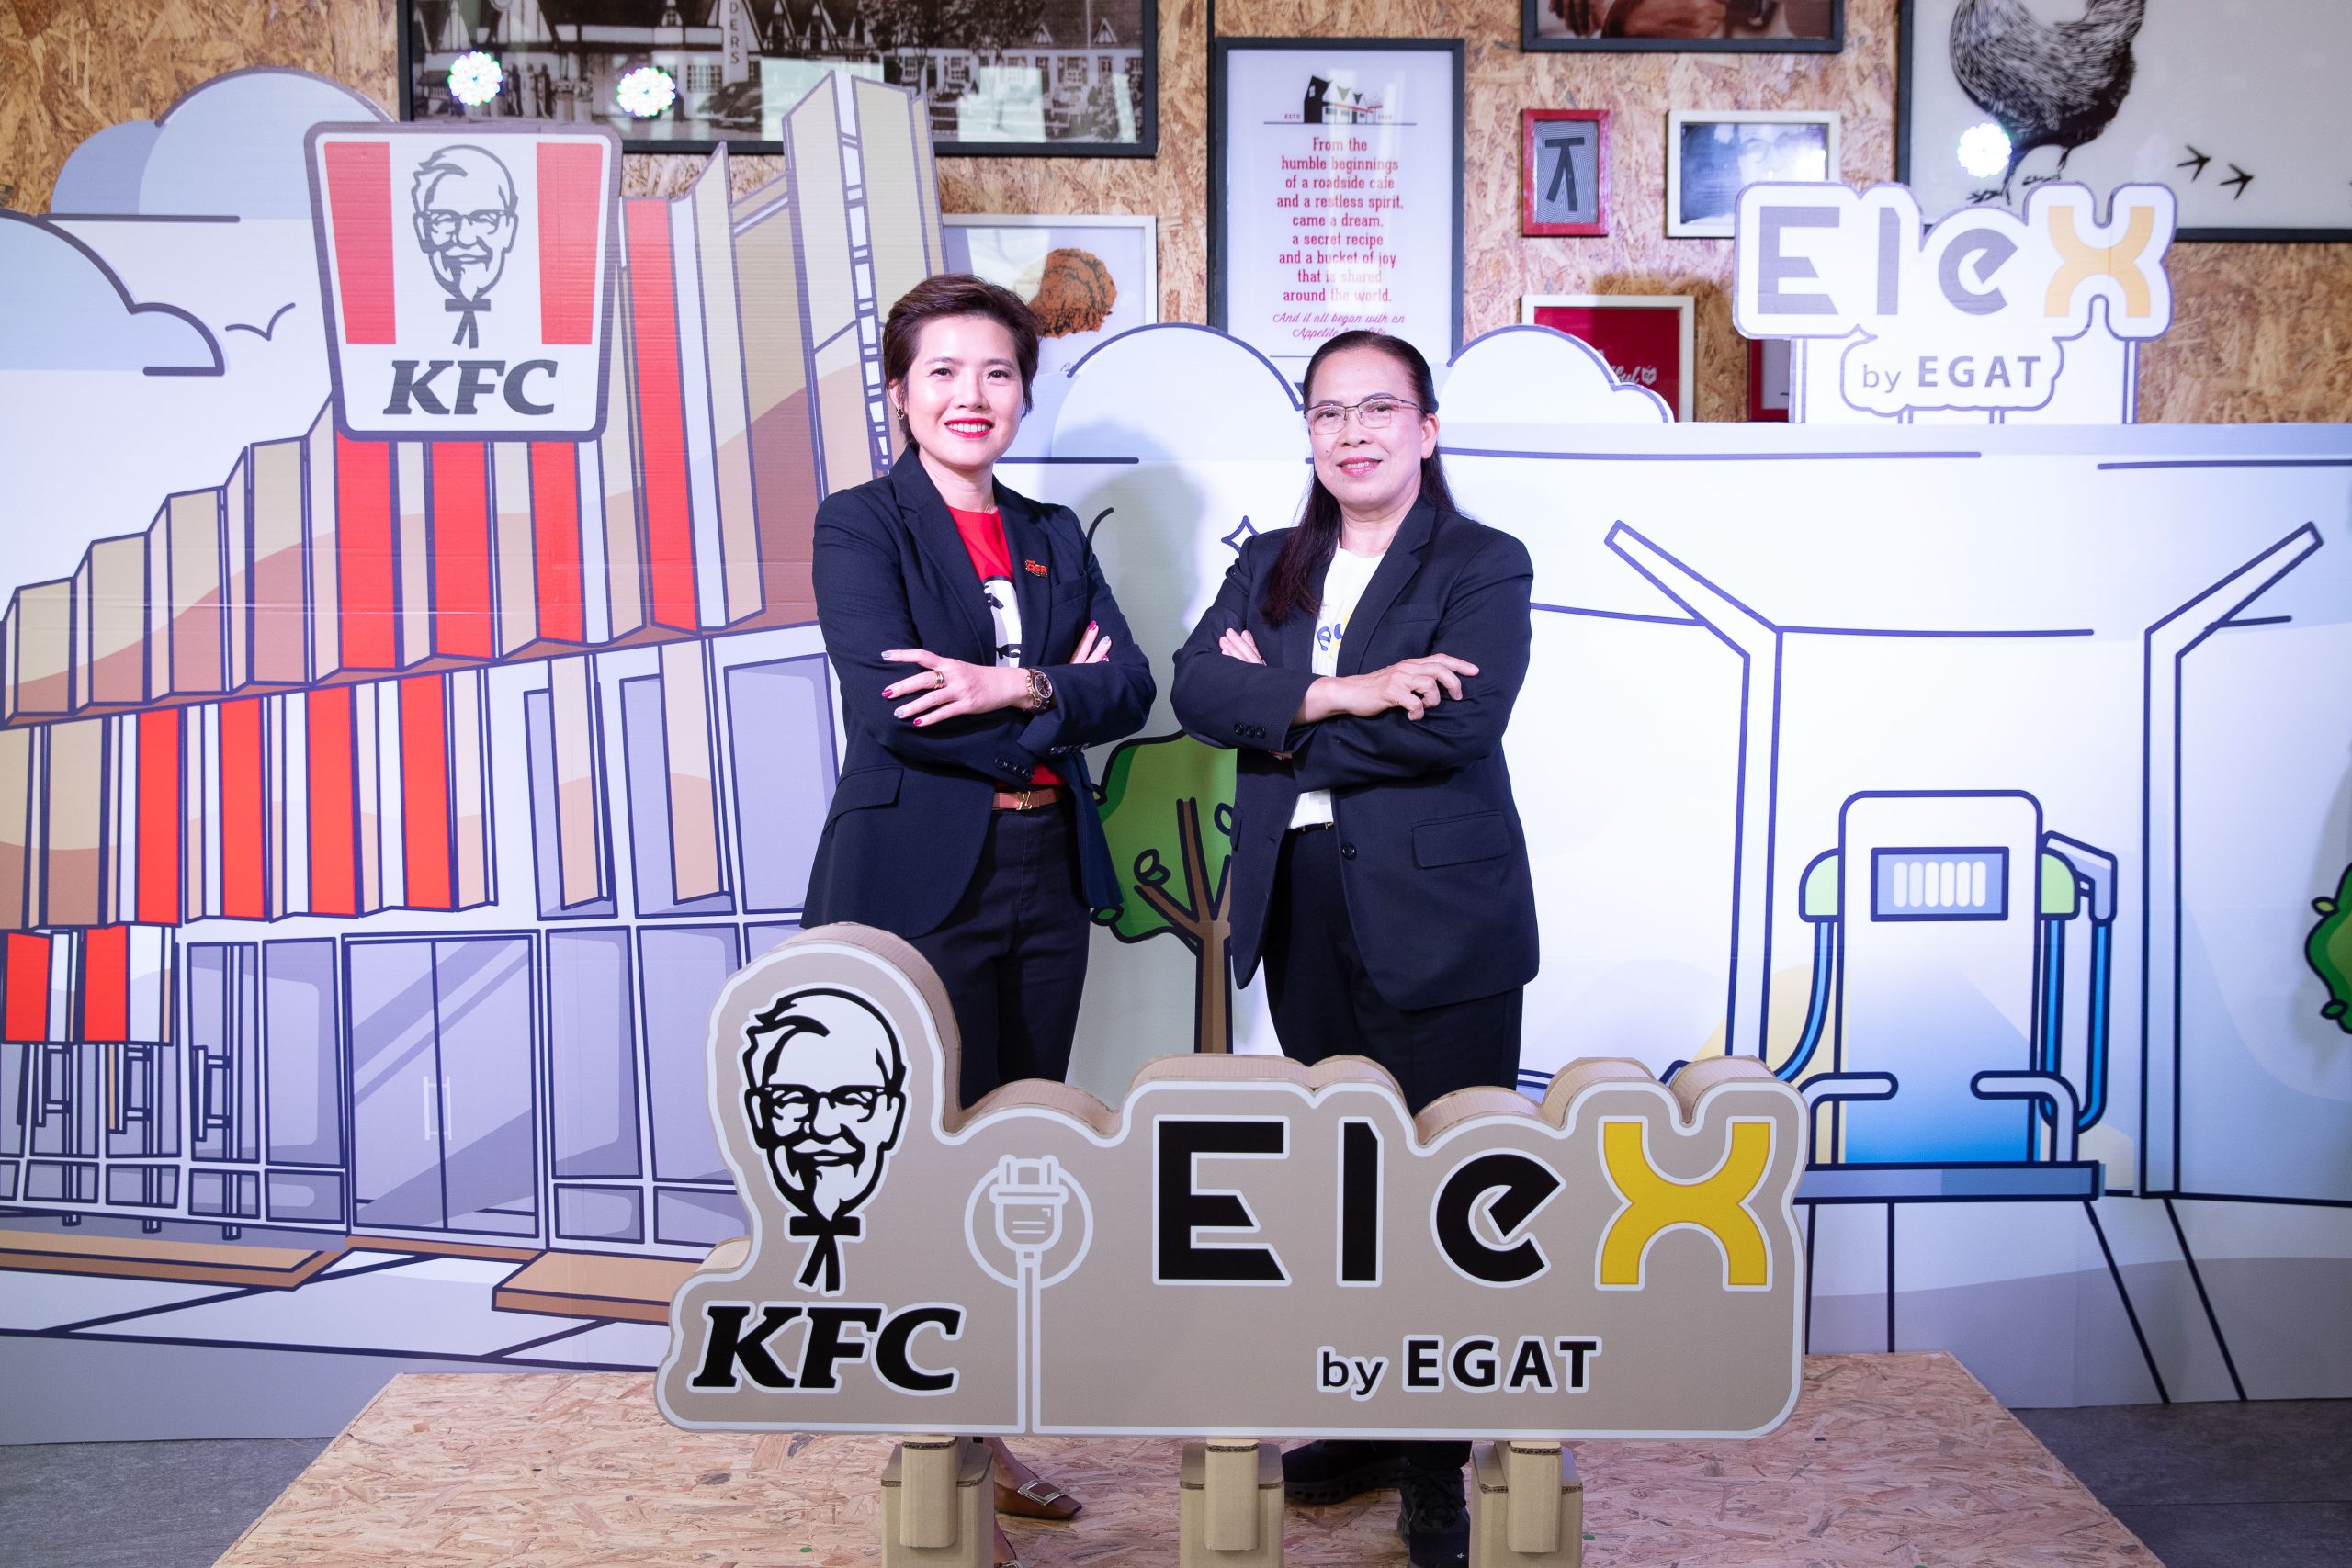 “The QSR of Asia” opens “KFC Green Store” and joins with EGAT to open “EleX by EGAT” charging station for EV users